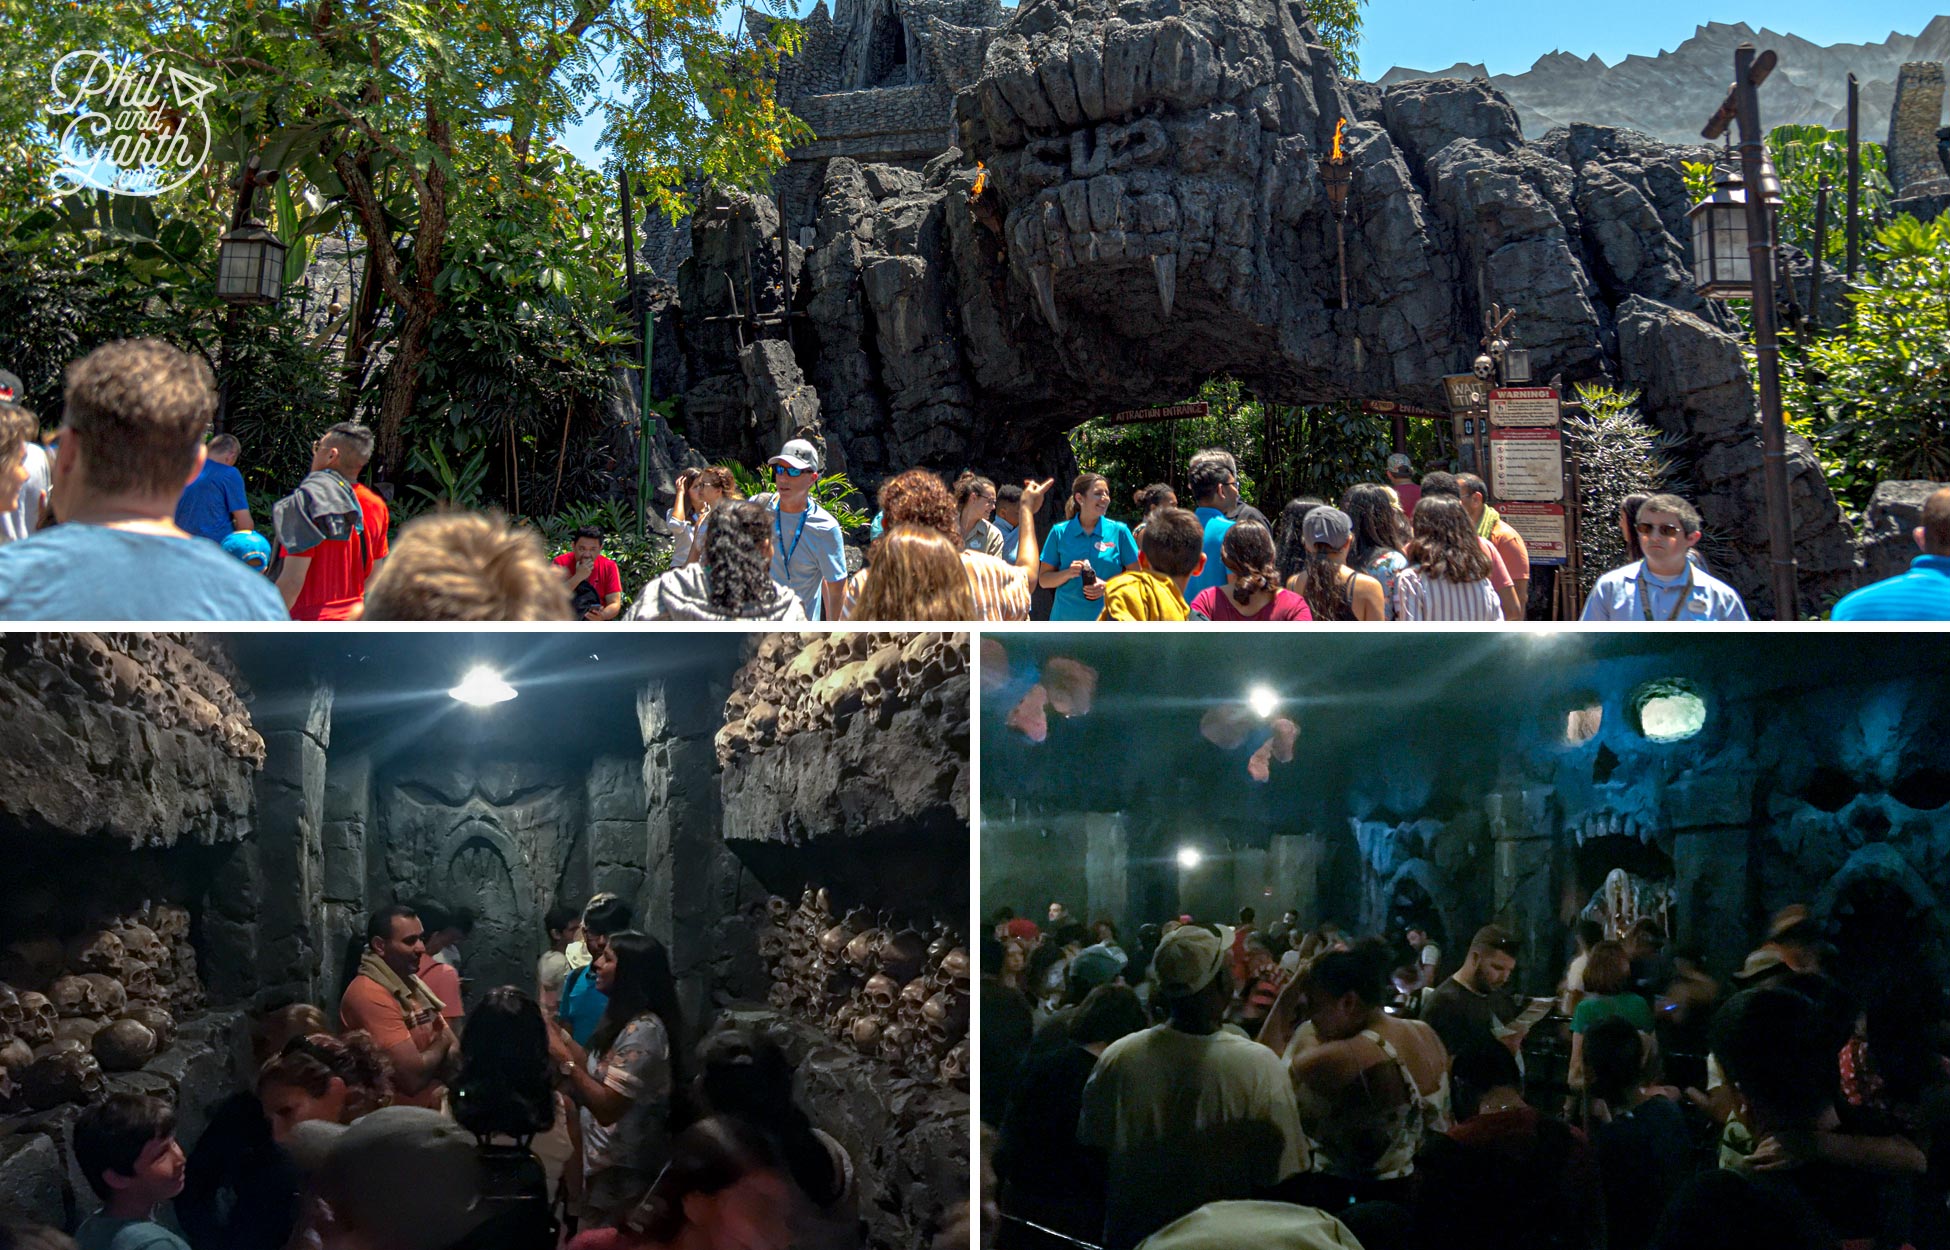 The entrance and queues for Skull Island Reign of Kong